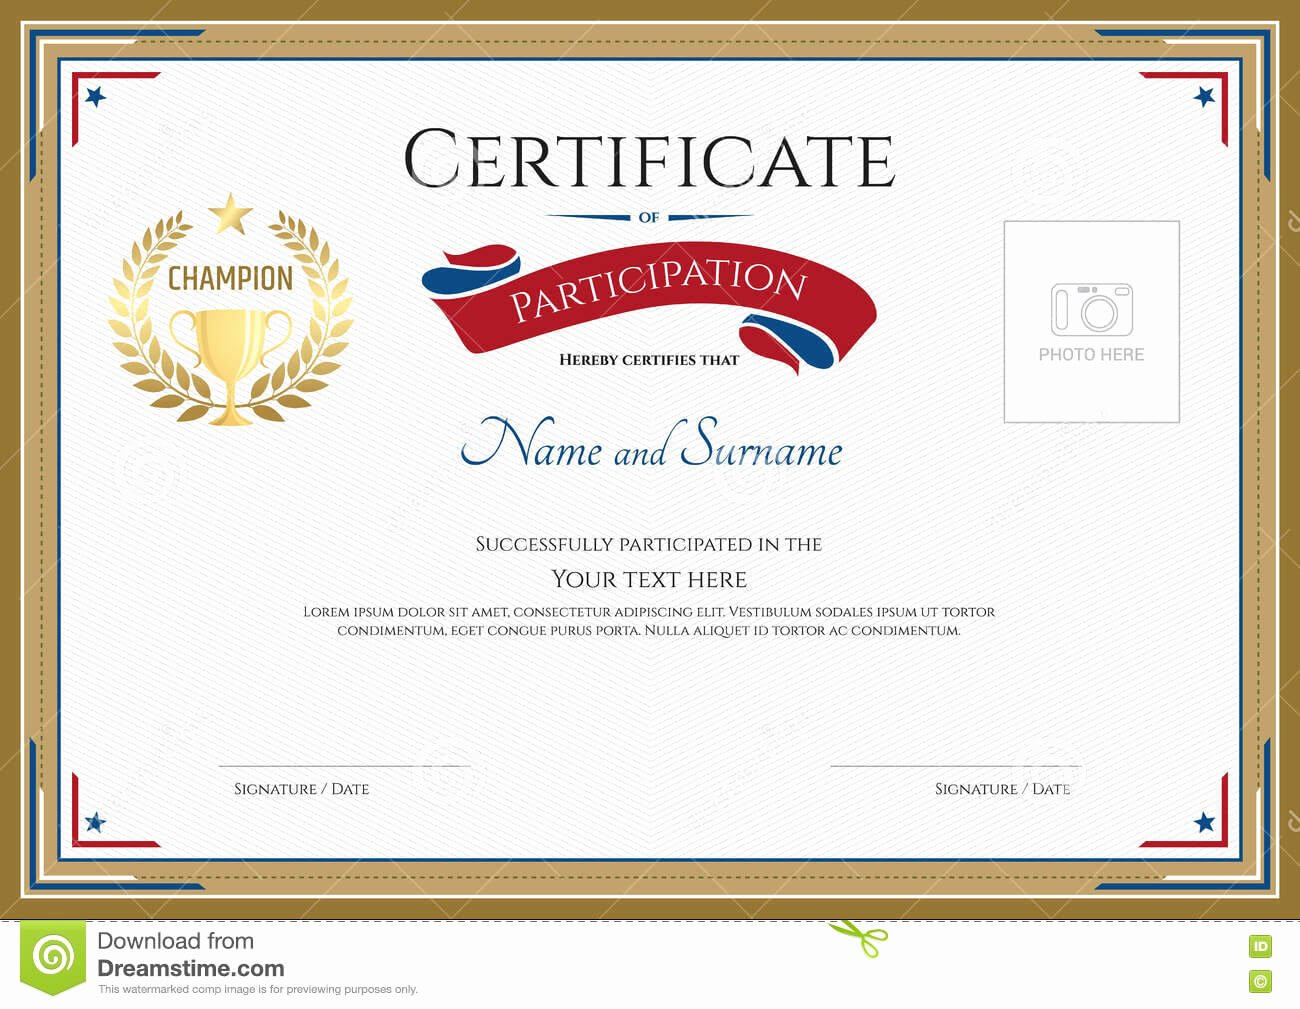 Sports Certificate Templates For Word Lovely Certificate With Certificate Of Participation Template Word